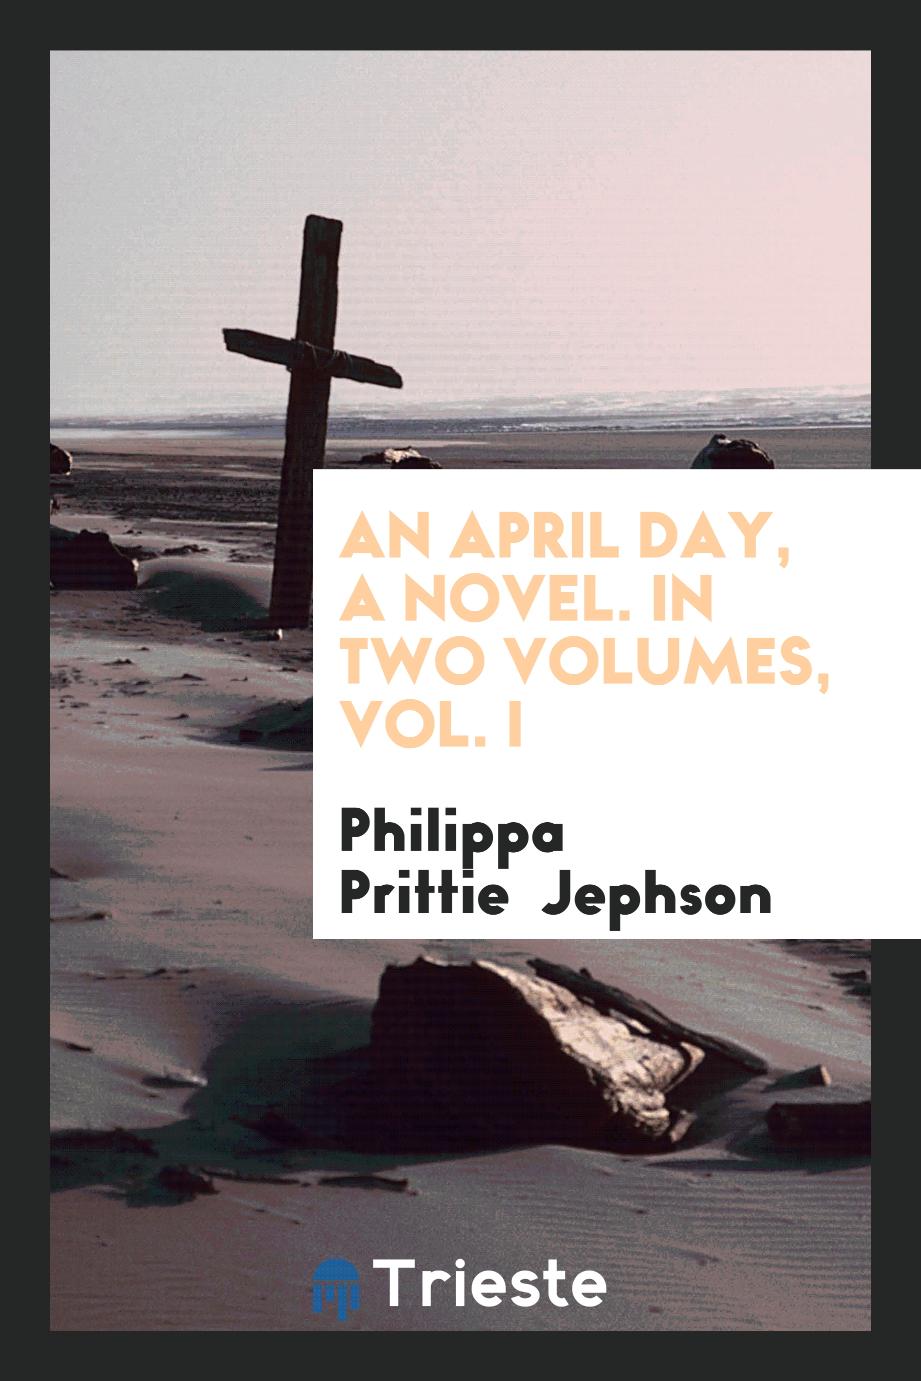 An April Day, a Novel. In Two Volumes, Vol. I